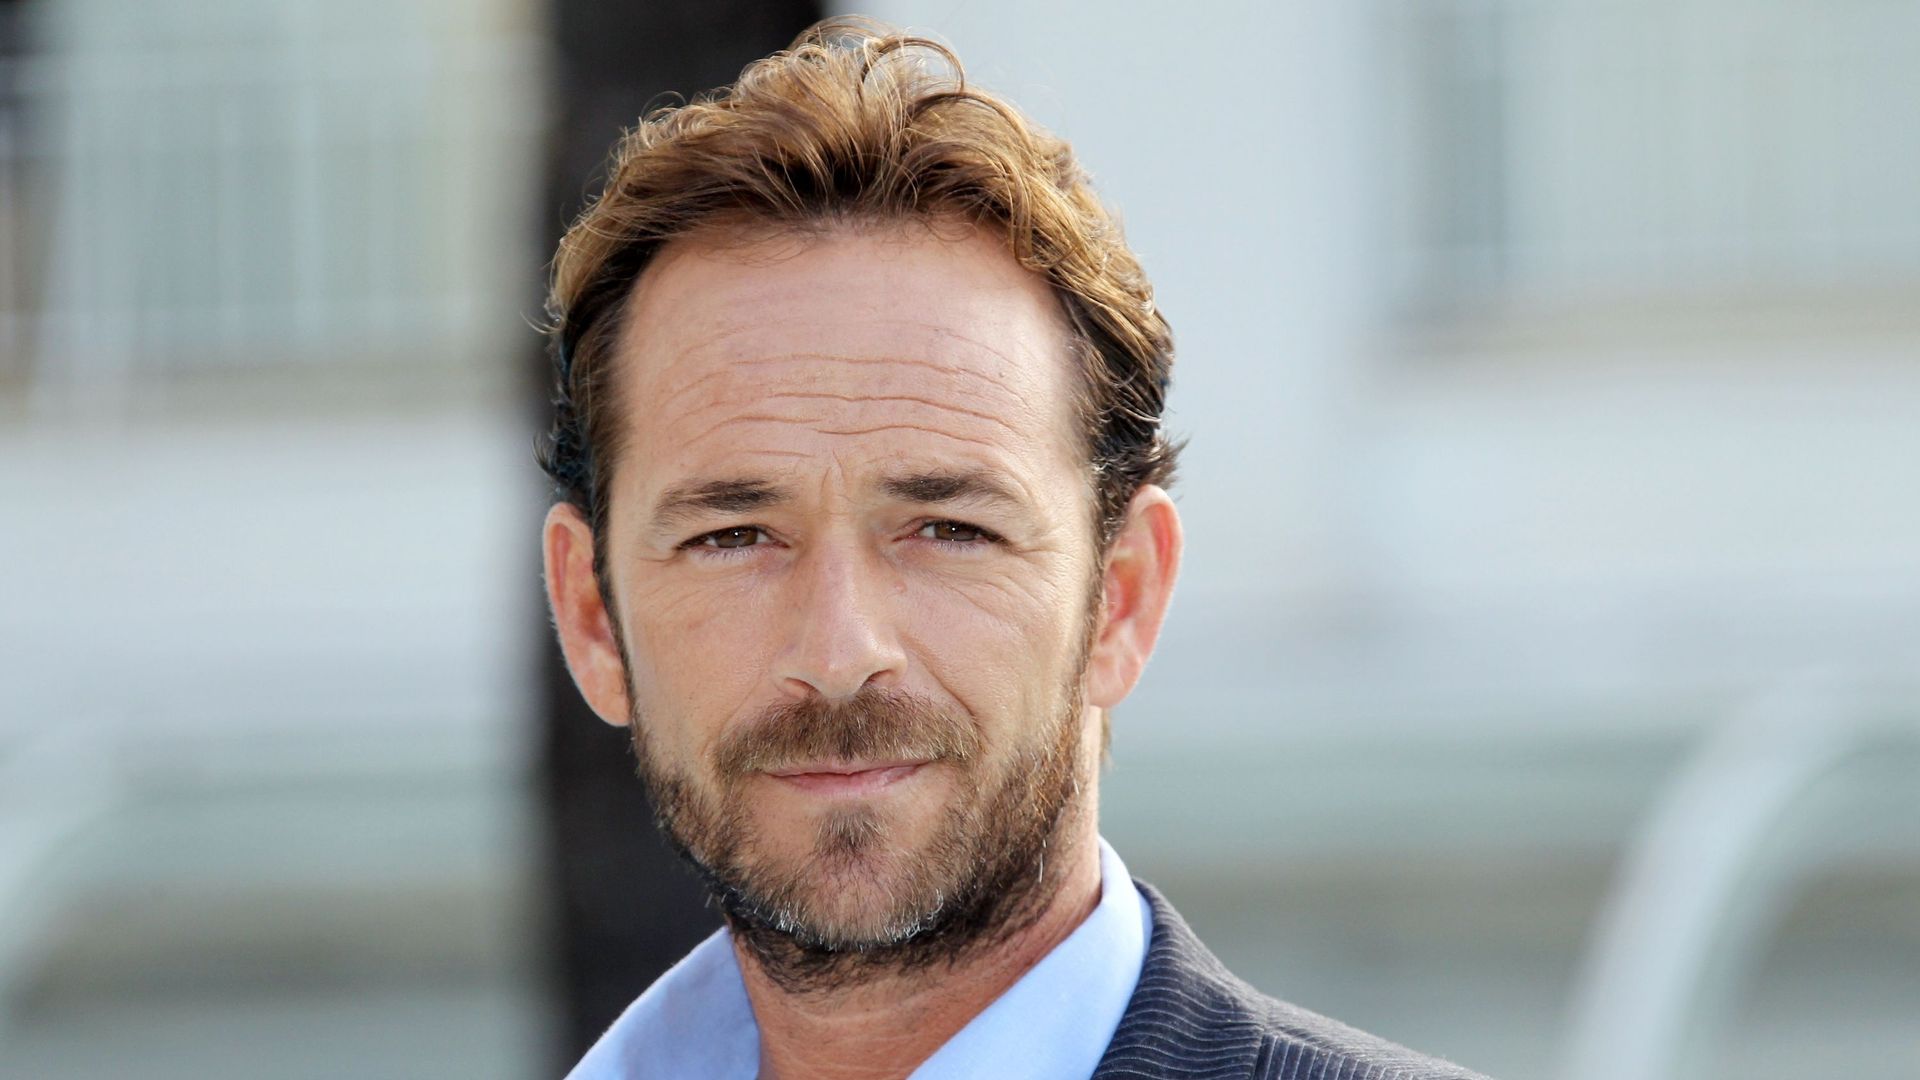 Luke Perry rejoint "Les Experts"